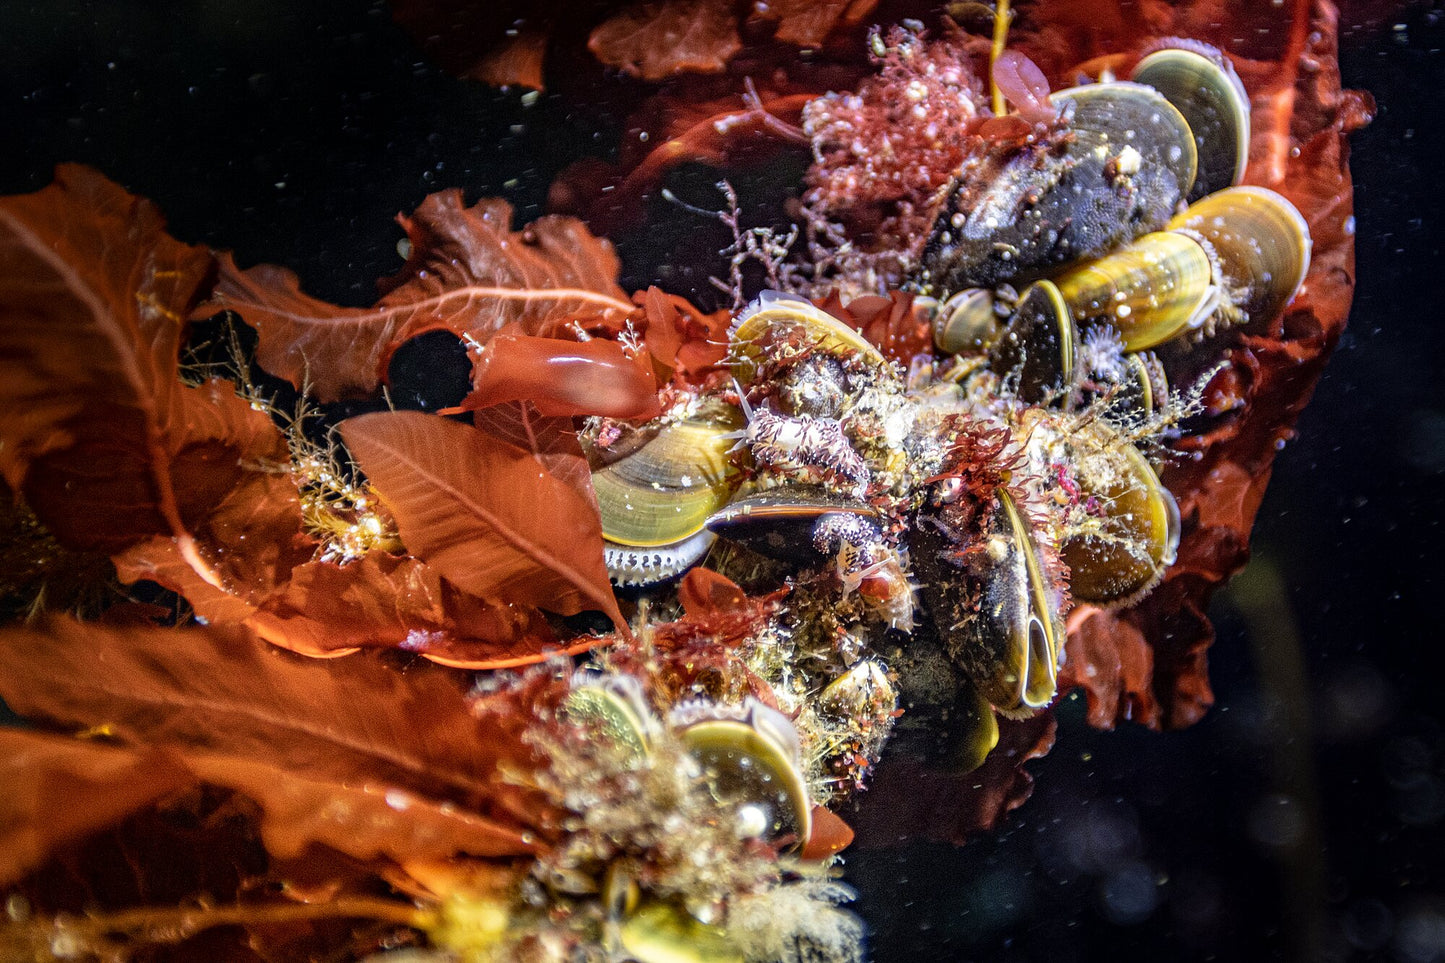 A close-up of marine creatures, including sea slugs and clams, nestled among red seaweed.